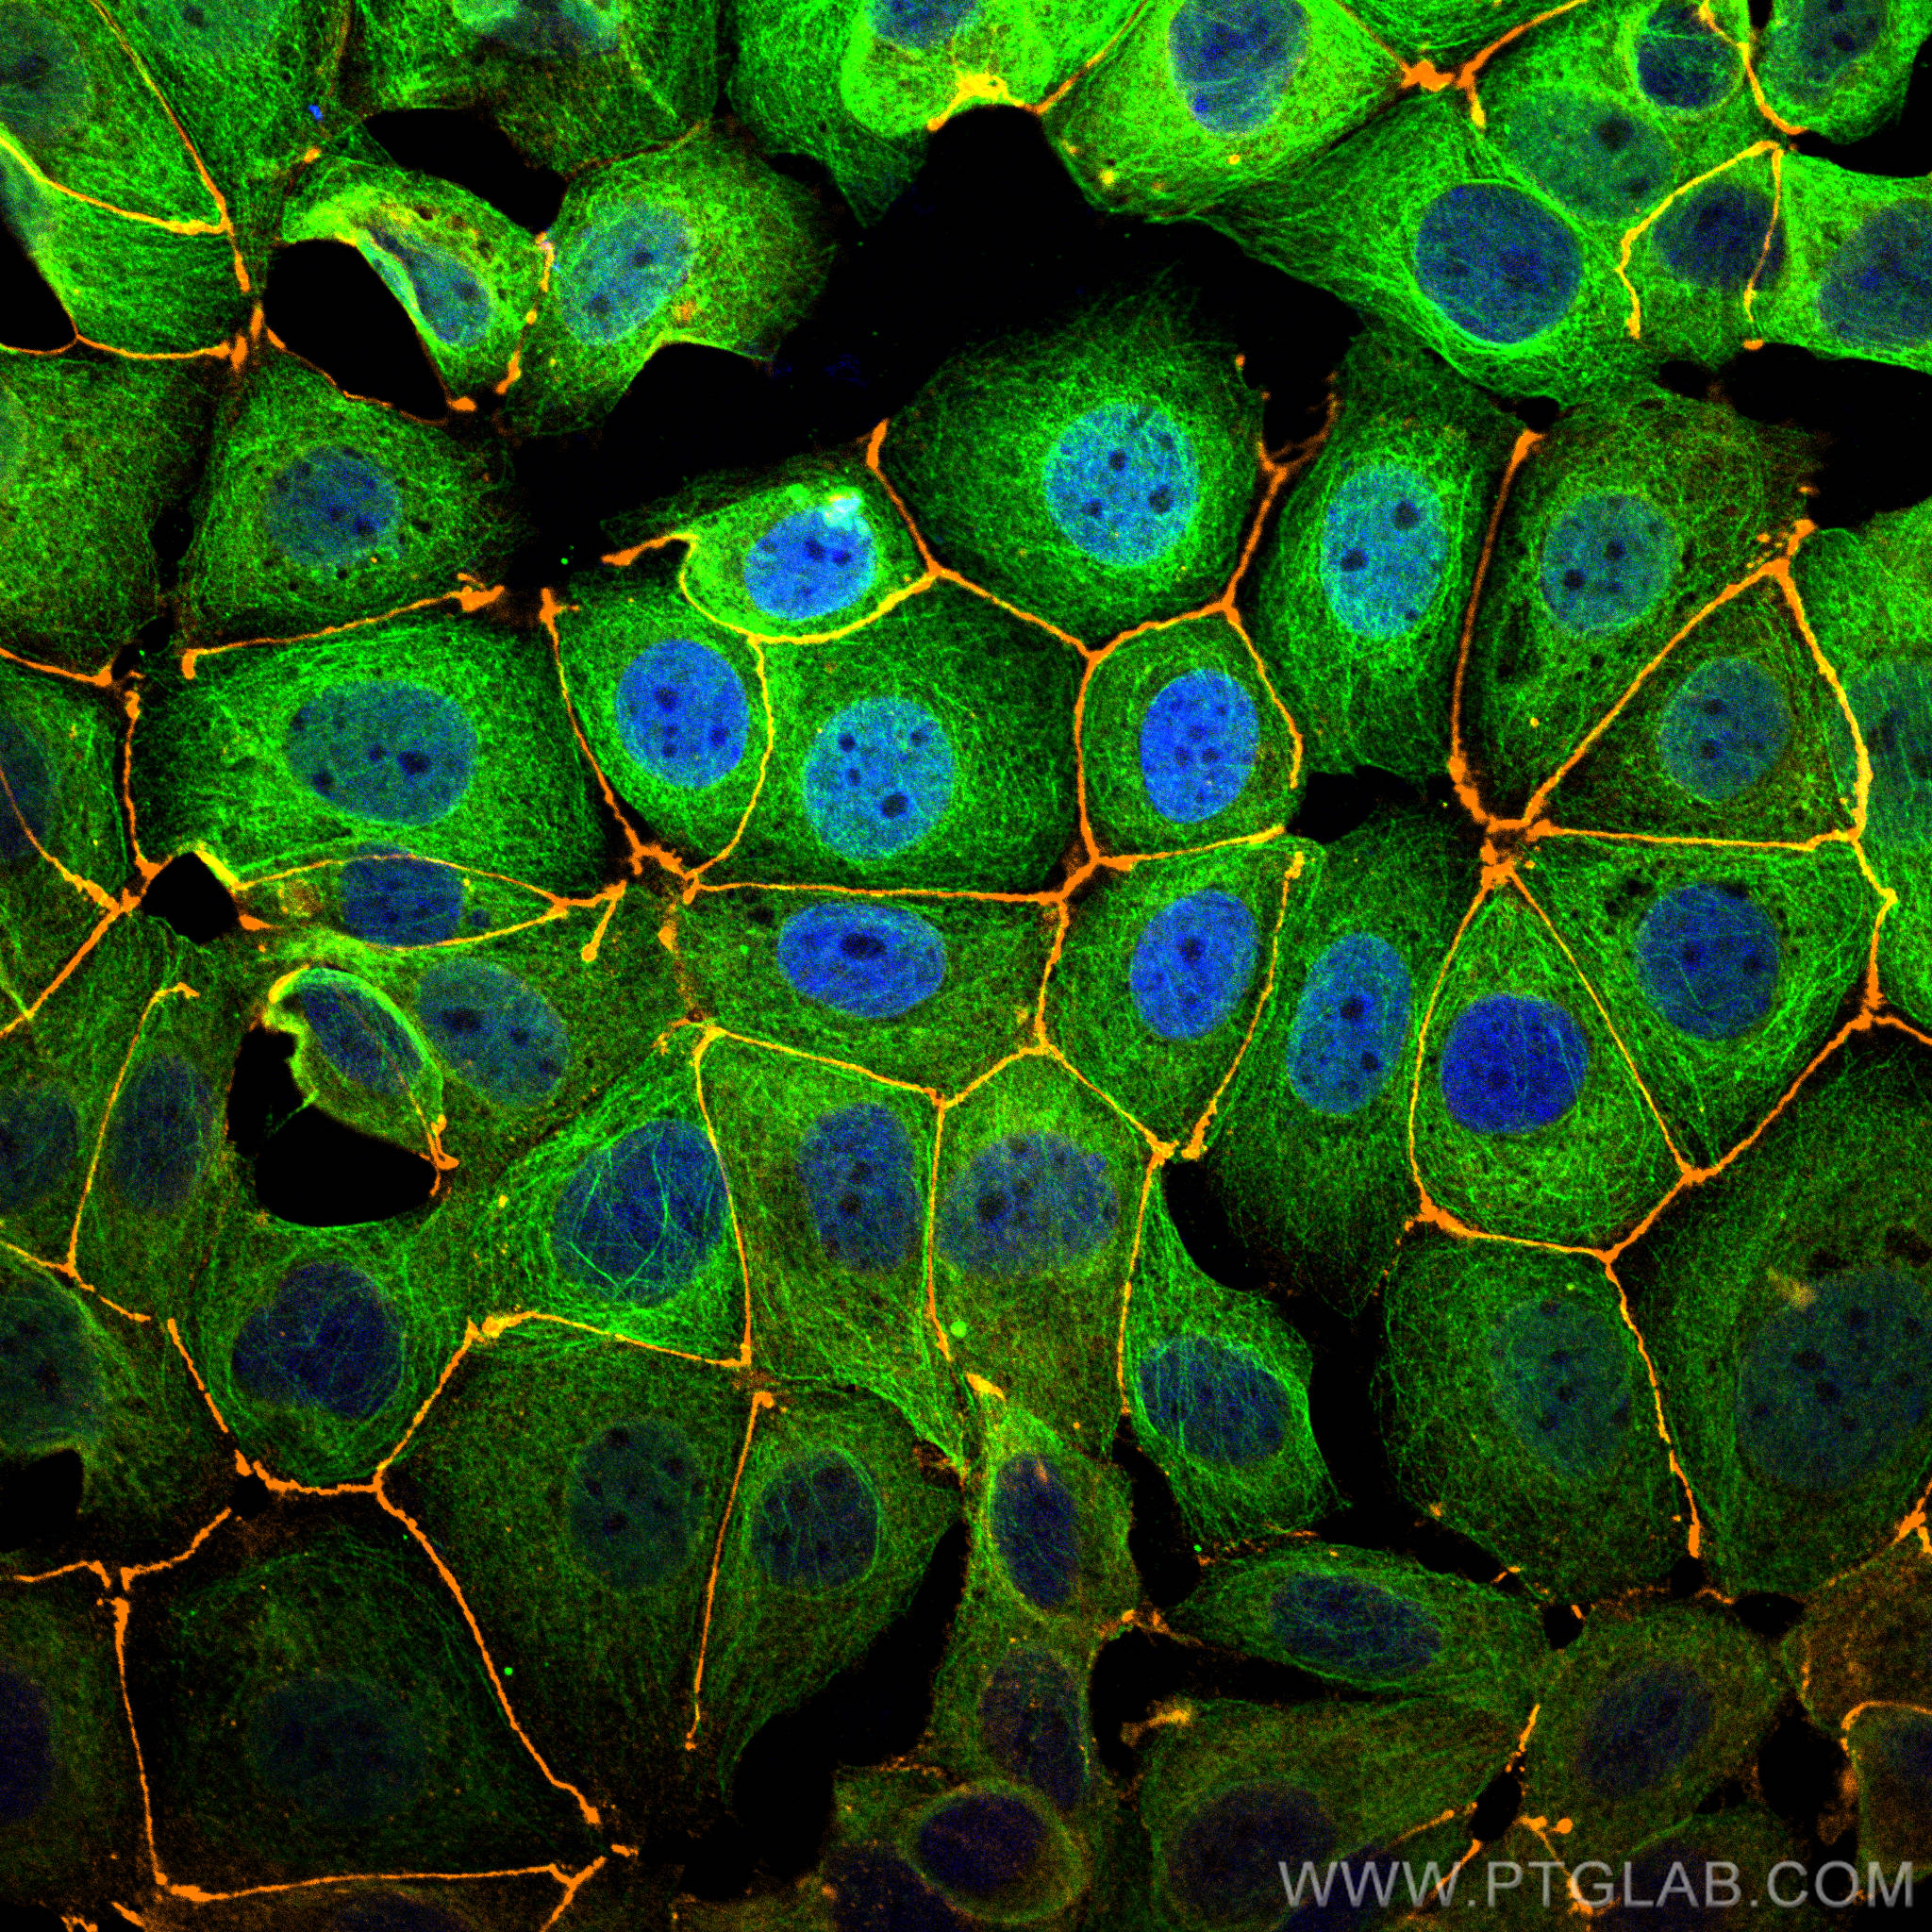 Immunofluorescence of MCF-7 cells: MCF-7 cells were fixed with 4% PFA and stained with Rabbit anti-ZO1 polyclonal antibody (21773-1-AP, 1:2000, orange) and mouse anti-Alpha Tubulin monoclonal antibody (66031-1-Ig, 1:1000, green). Multi-rAb CoraLite® Plus 555-Goat Anti-Rabbit Recombinant Secondary Antibody (H+L) (RGAR003, 1:500) and Multi-rAb CoraLite® Plus 488-Goat Anti-Mouse Recombinant Secondary Antibody (H+L) (RGAM002, 1:500) were used for detection.